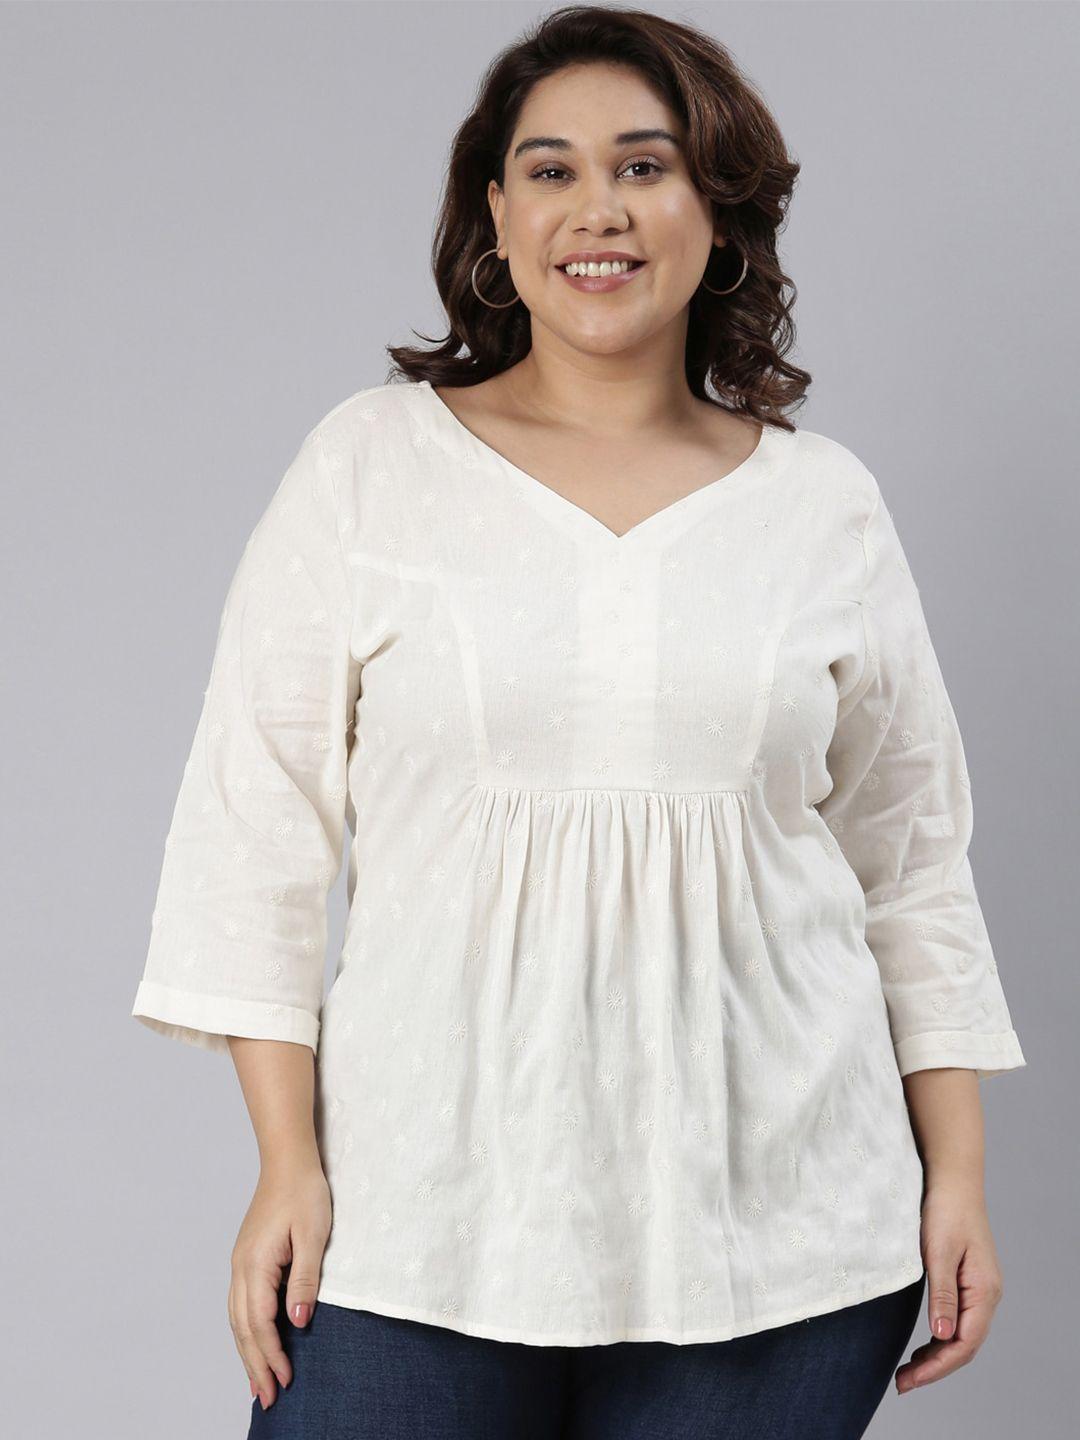 the-pink-moon-plus-size-floral-embroidered-v-neck-empire-top